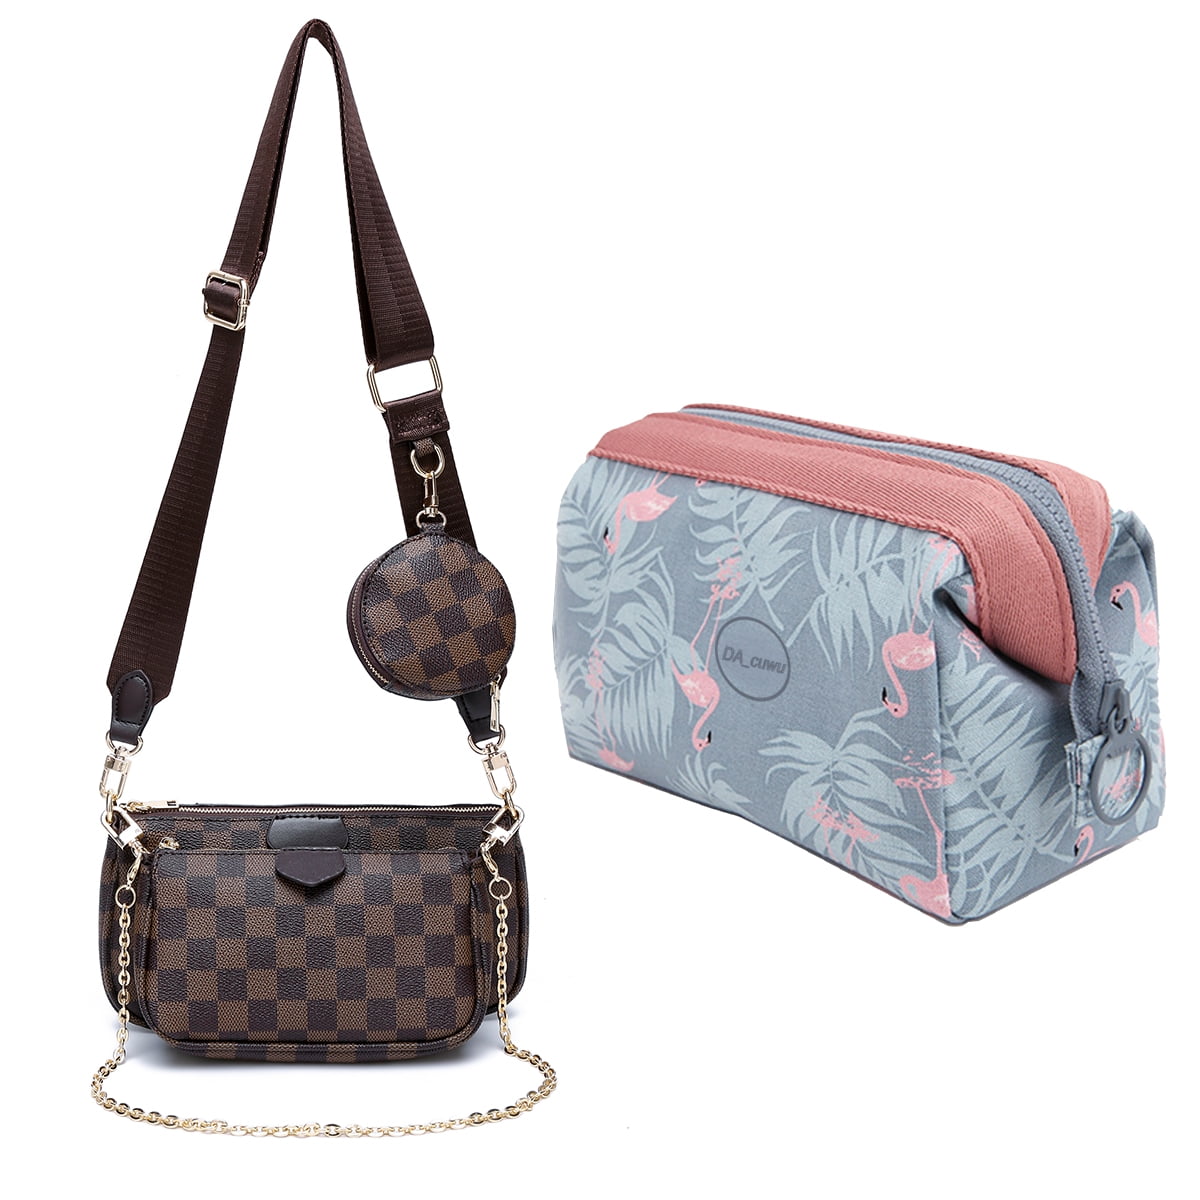 Vuch - Fashion tips: how to pair a handbag with a wallet?